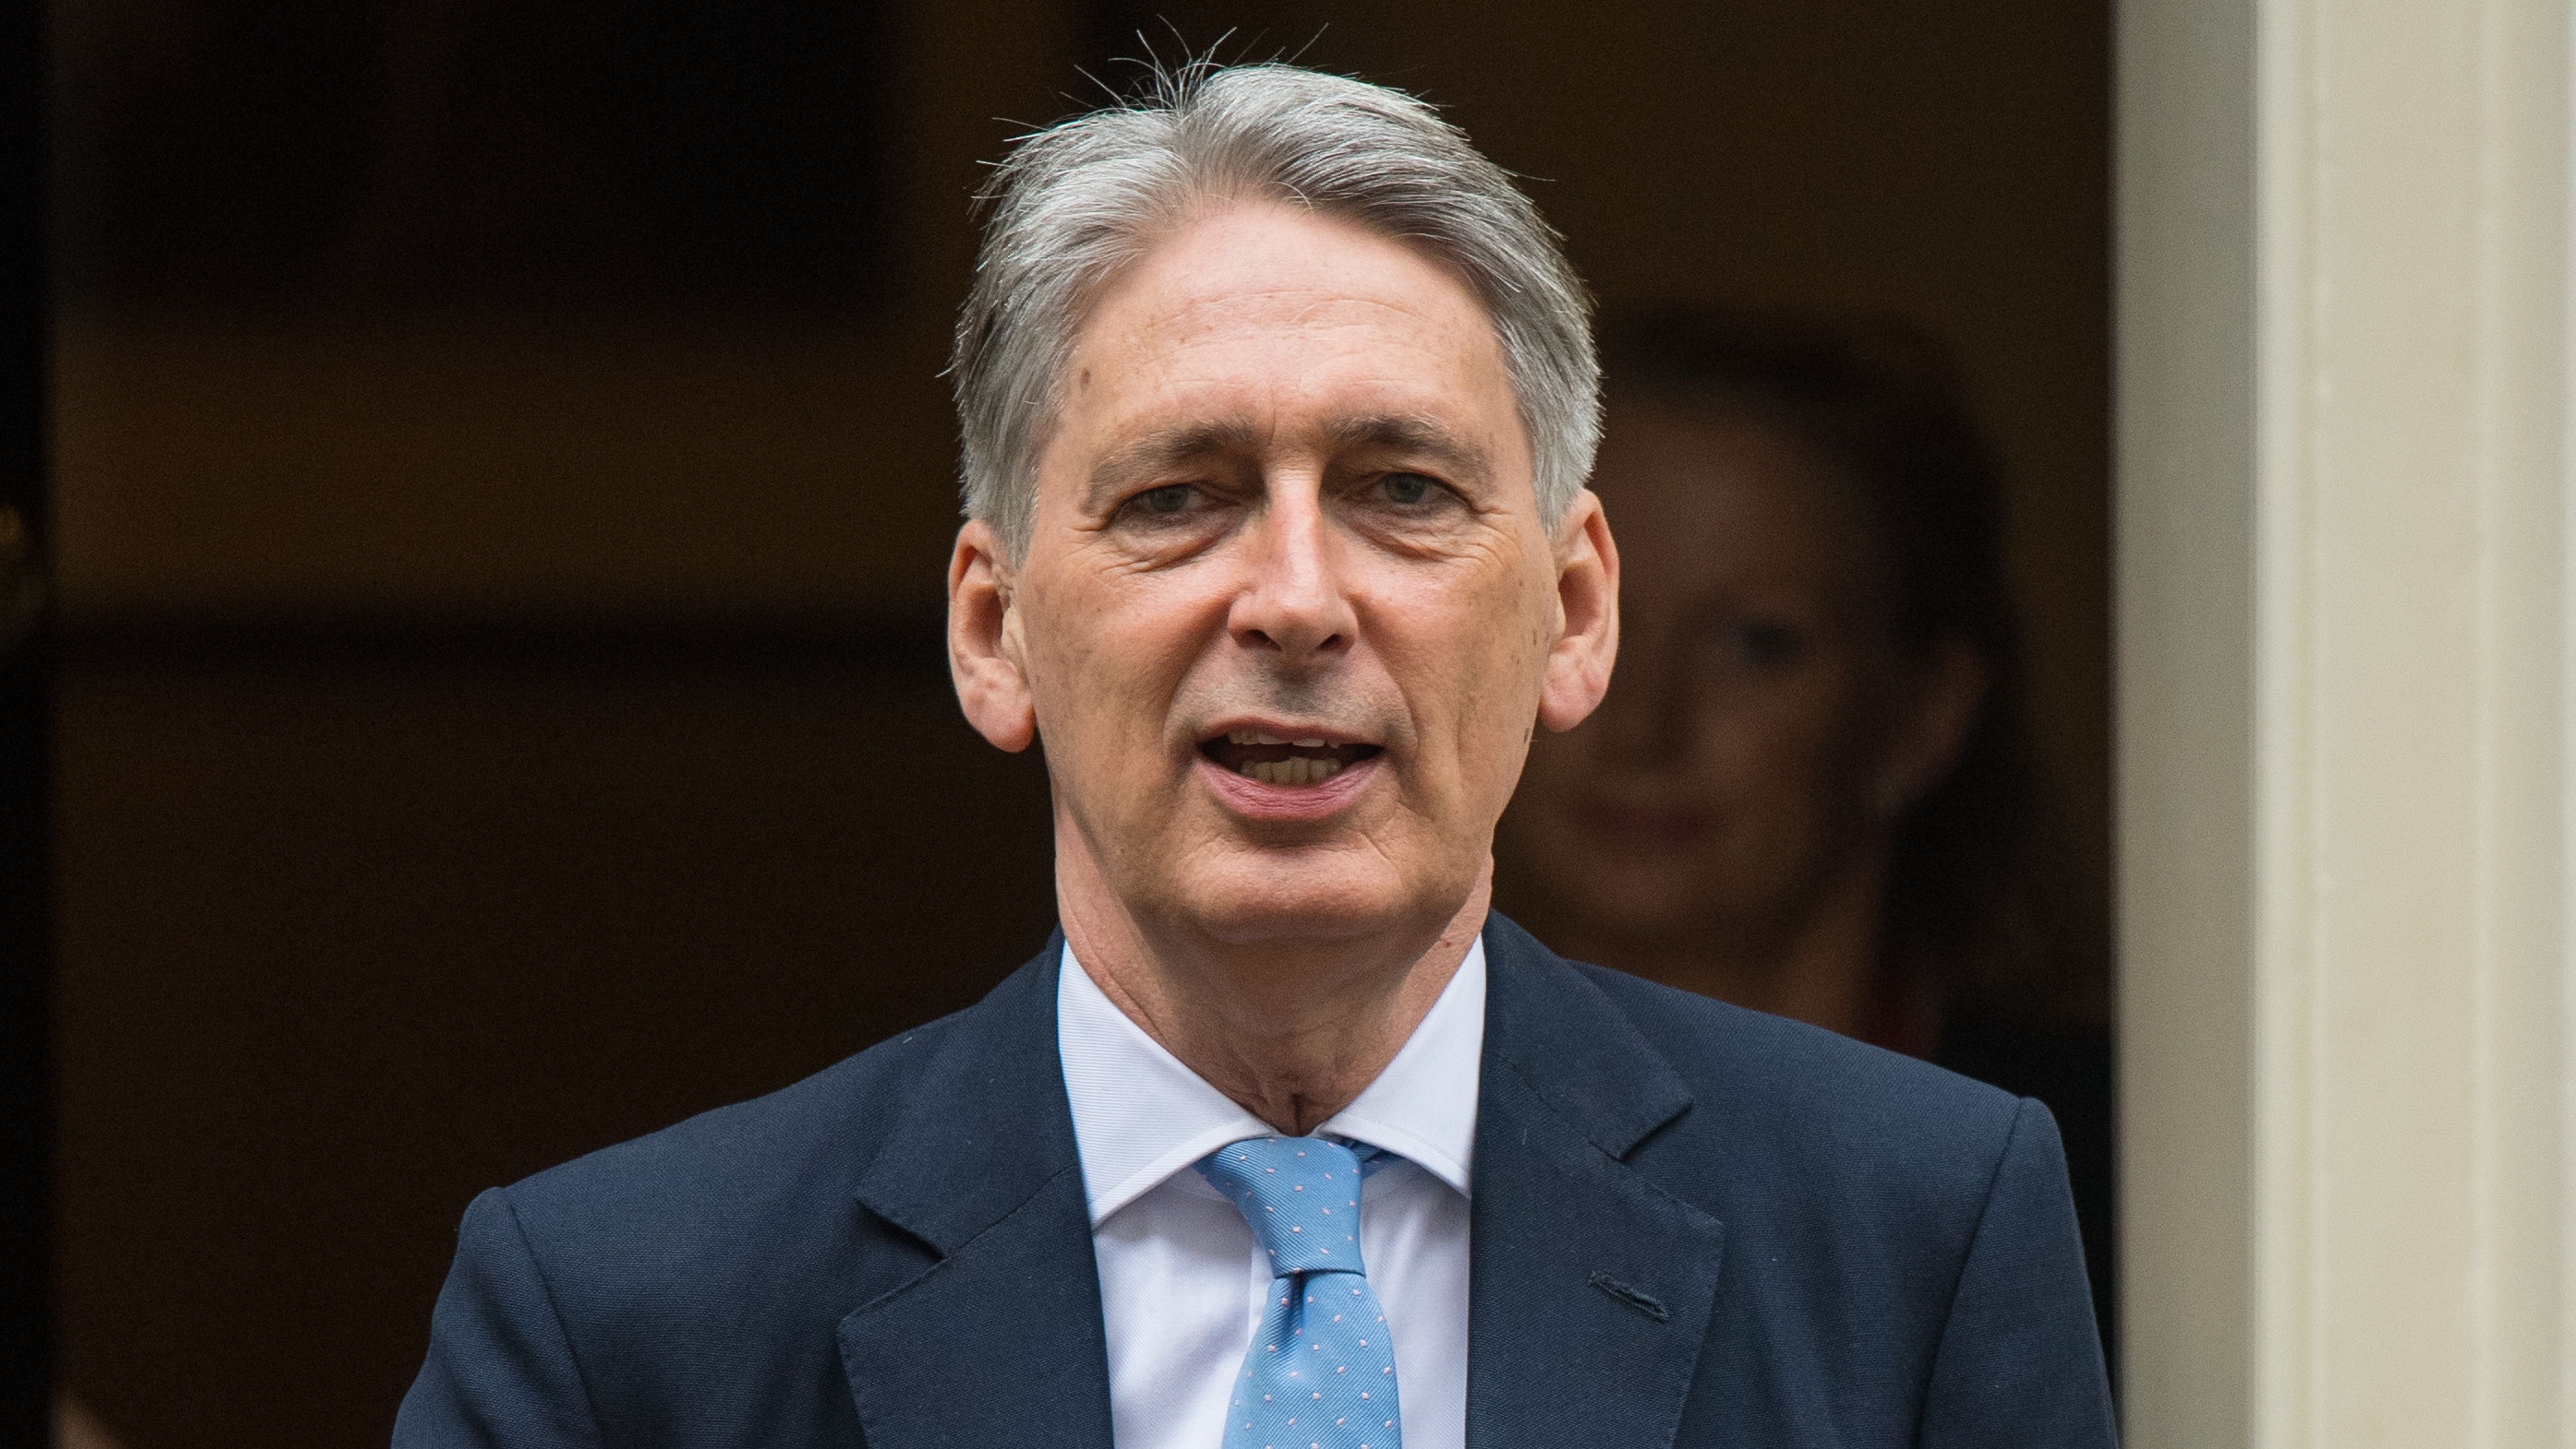 Chancellor Philip Hammond has suggested Brexit may only mean a modest change to trade terms with EU (Dominic Lipinski/PA)